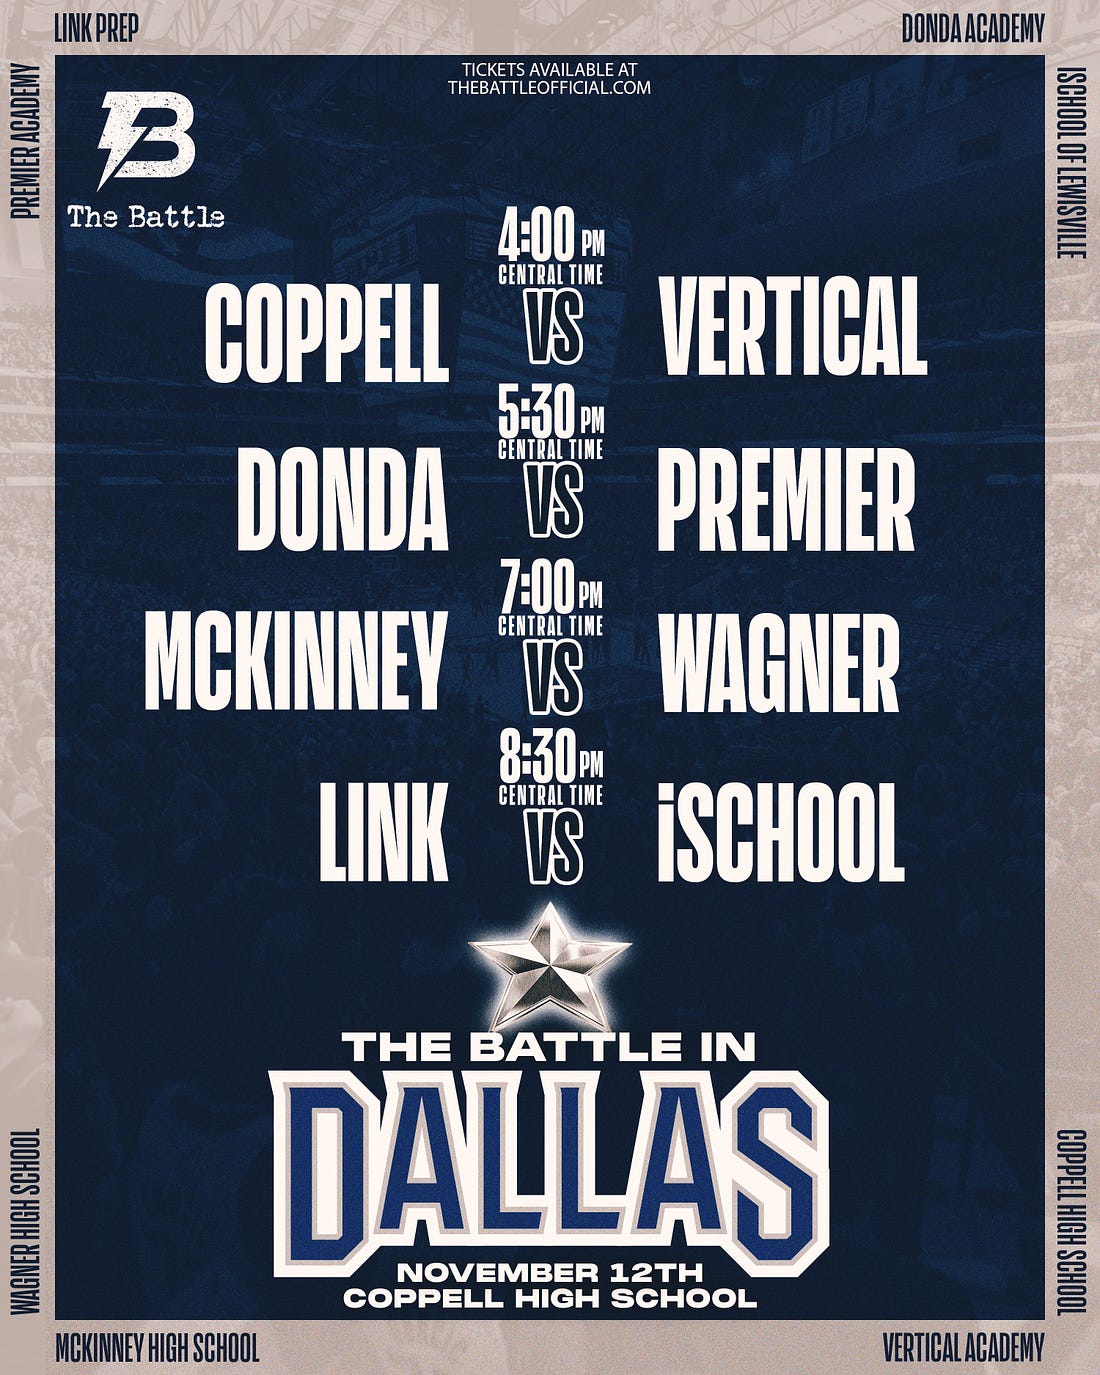 Poster showing Coppell vs. Vertical at 4 p.m., Donda vs. Premier at 5:30 p.m., McKinney vs. Wagner at 7 p.m., and Link vs. iSchool at 8:30 p.m.